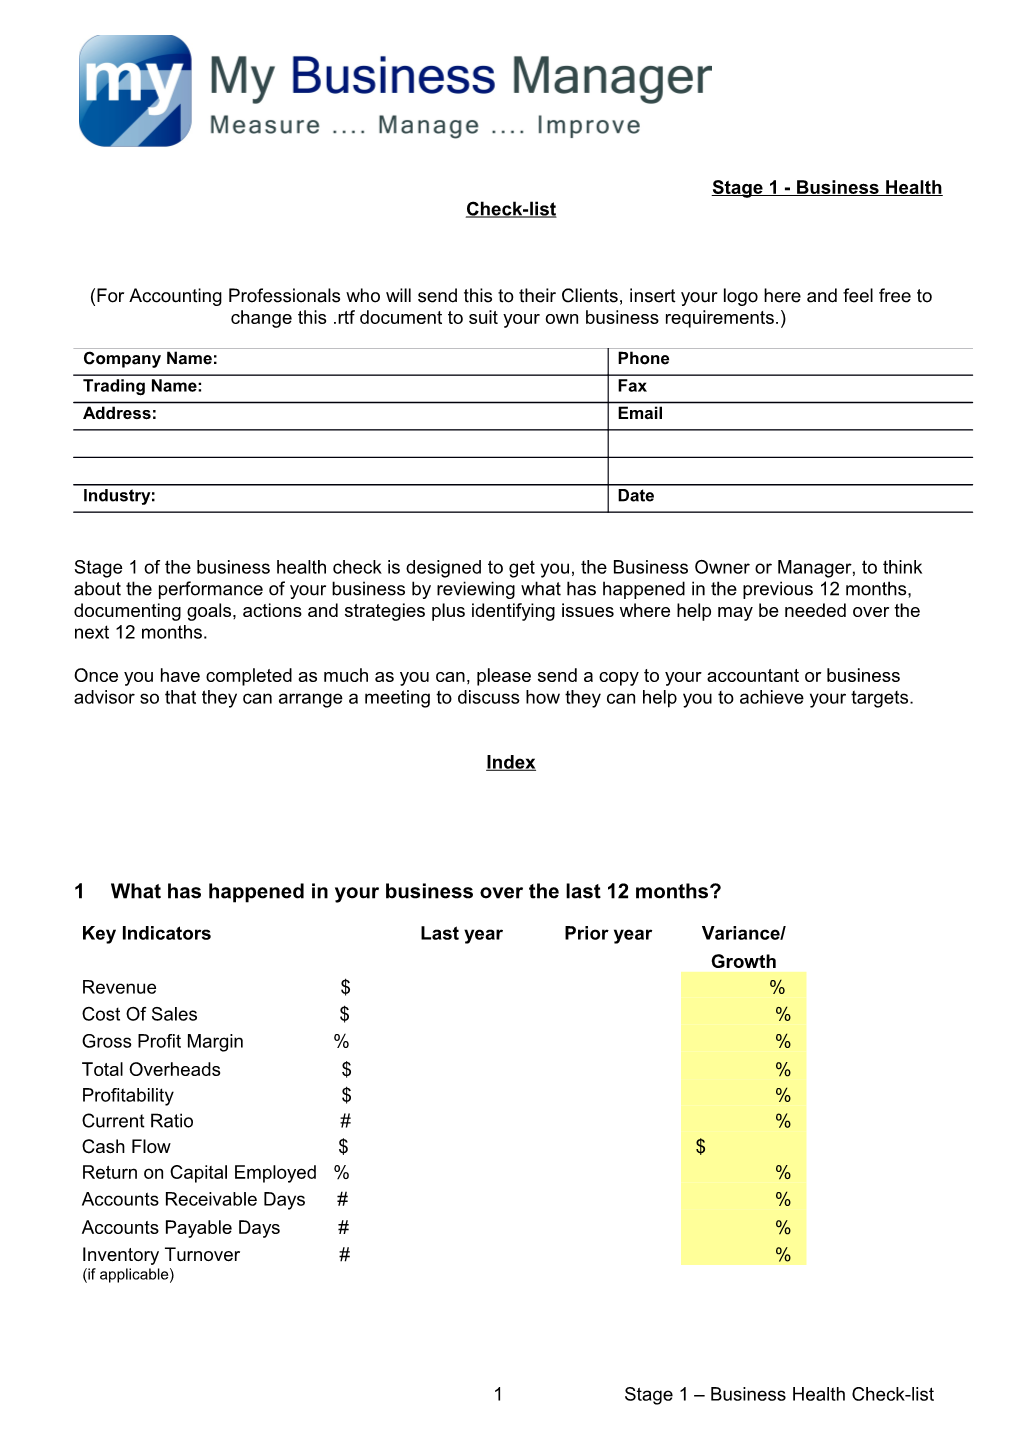 Business Stage 1 - Business Review Worksheets